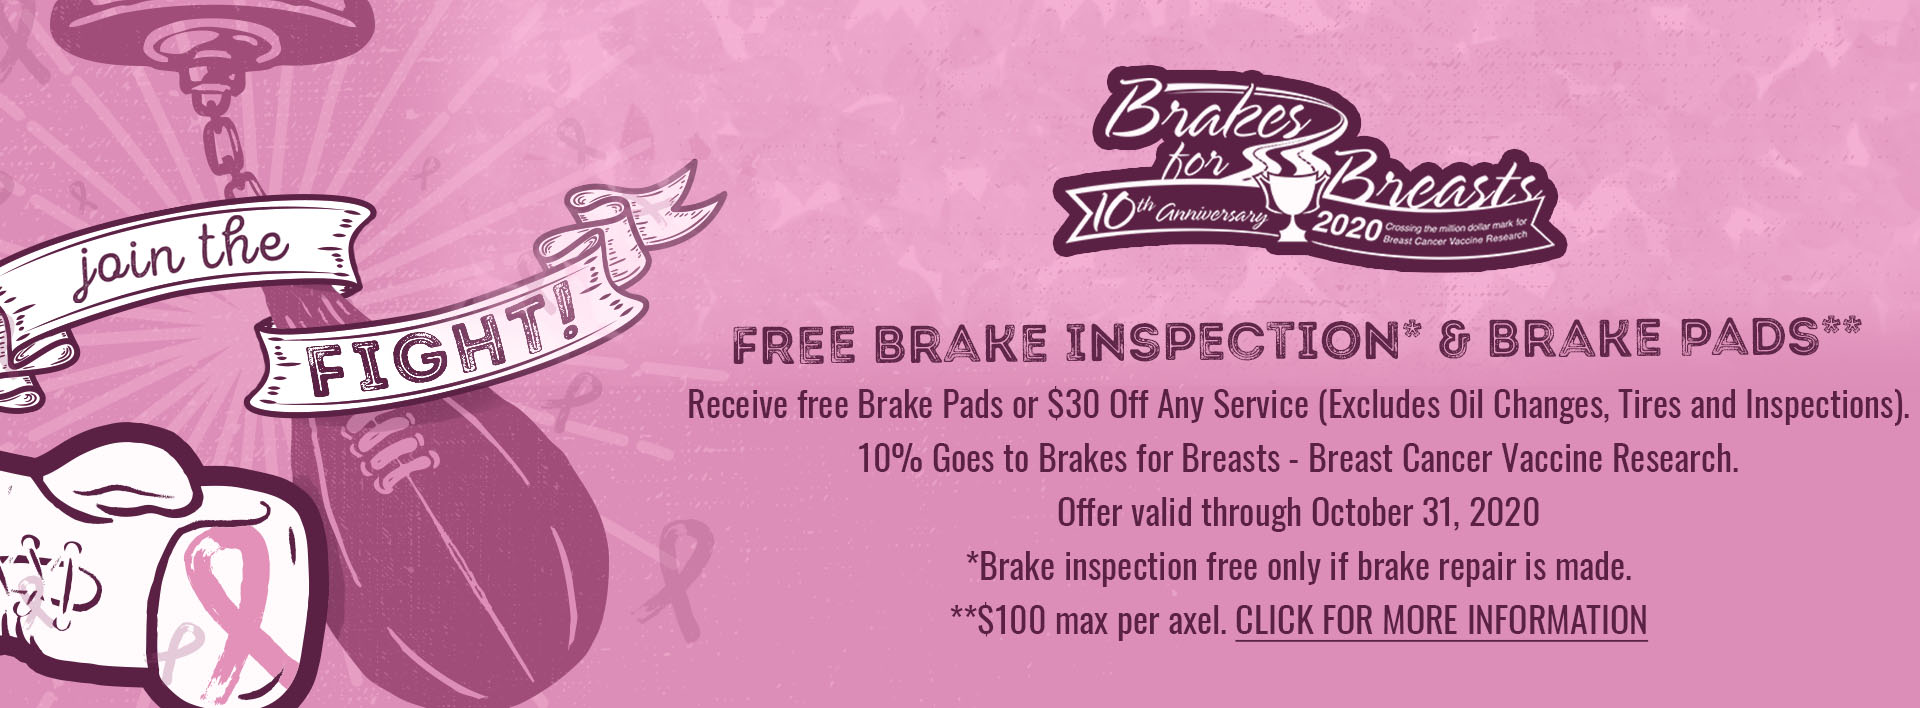 Brakes for Breasts & Free Brake Pads!! 